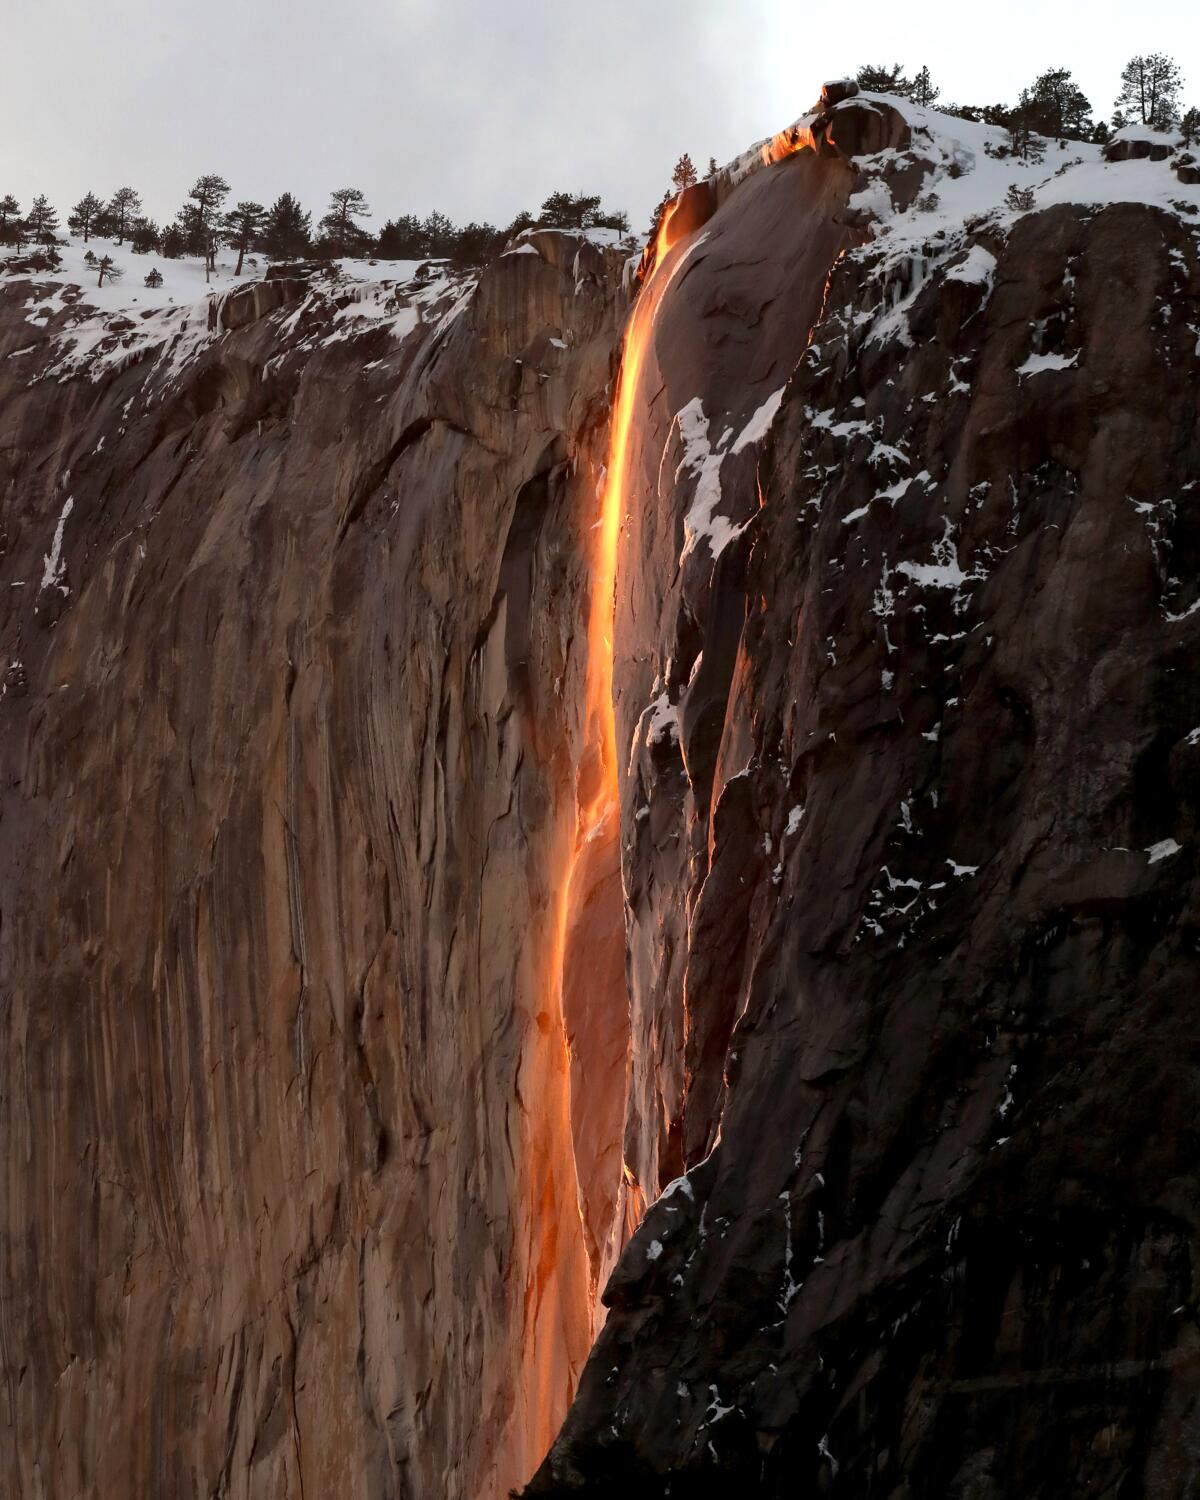 What looks like a stream of red lava is seen on the face of a cliff.